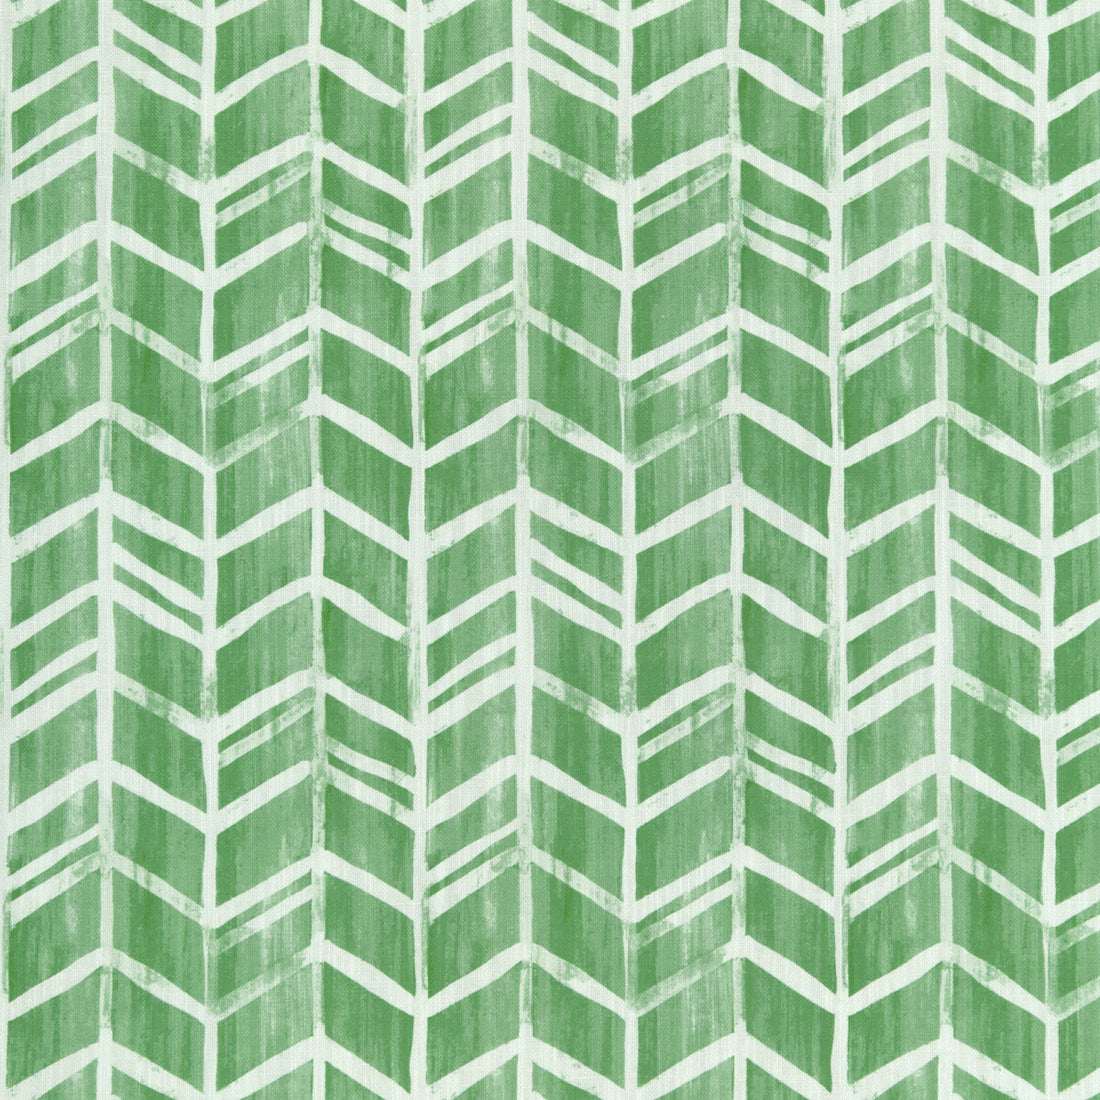 Dont Fret fabric in jade color - pattern DONT FRET.31.0 - by Kravet Basics in the Small Scale Prints collection